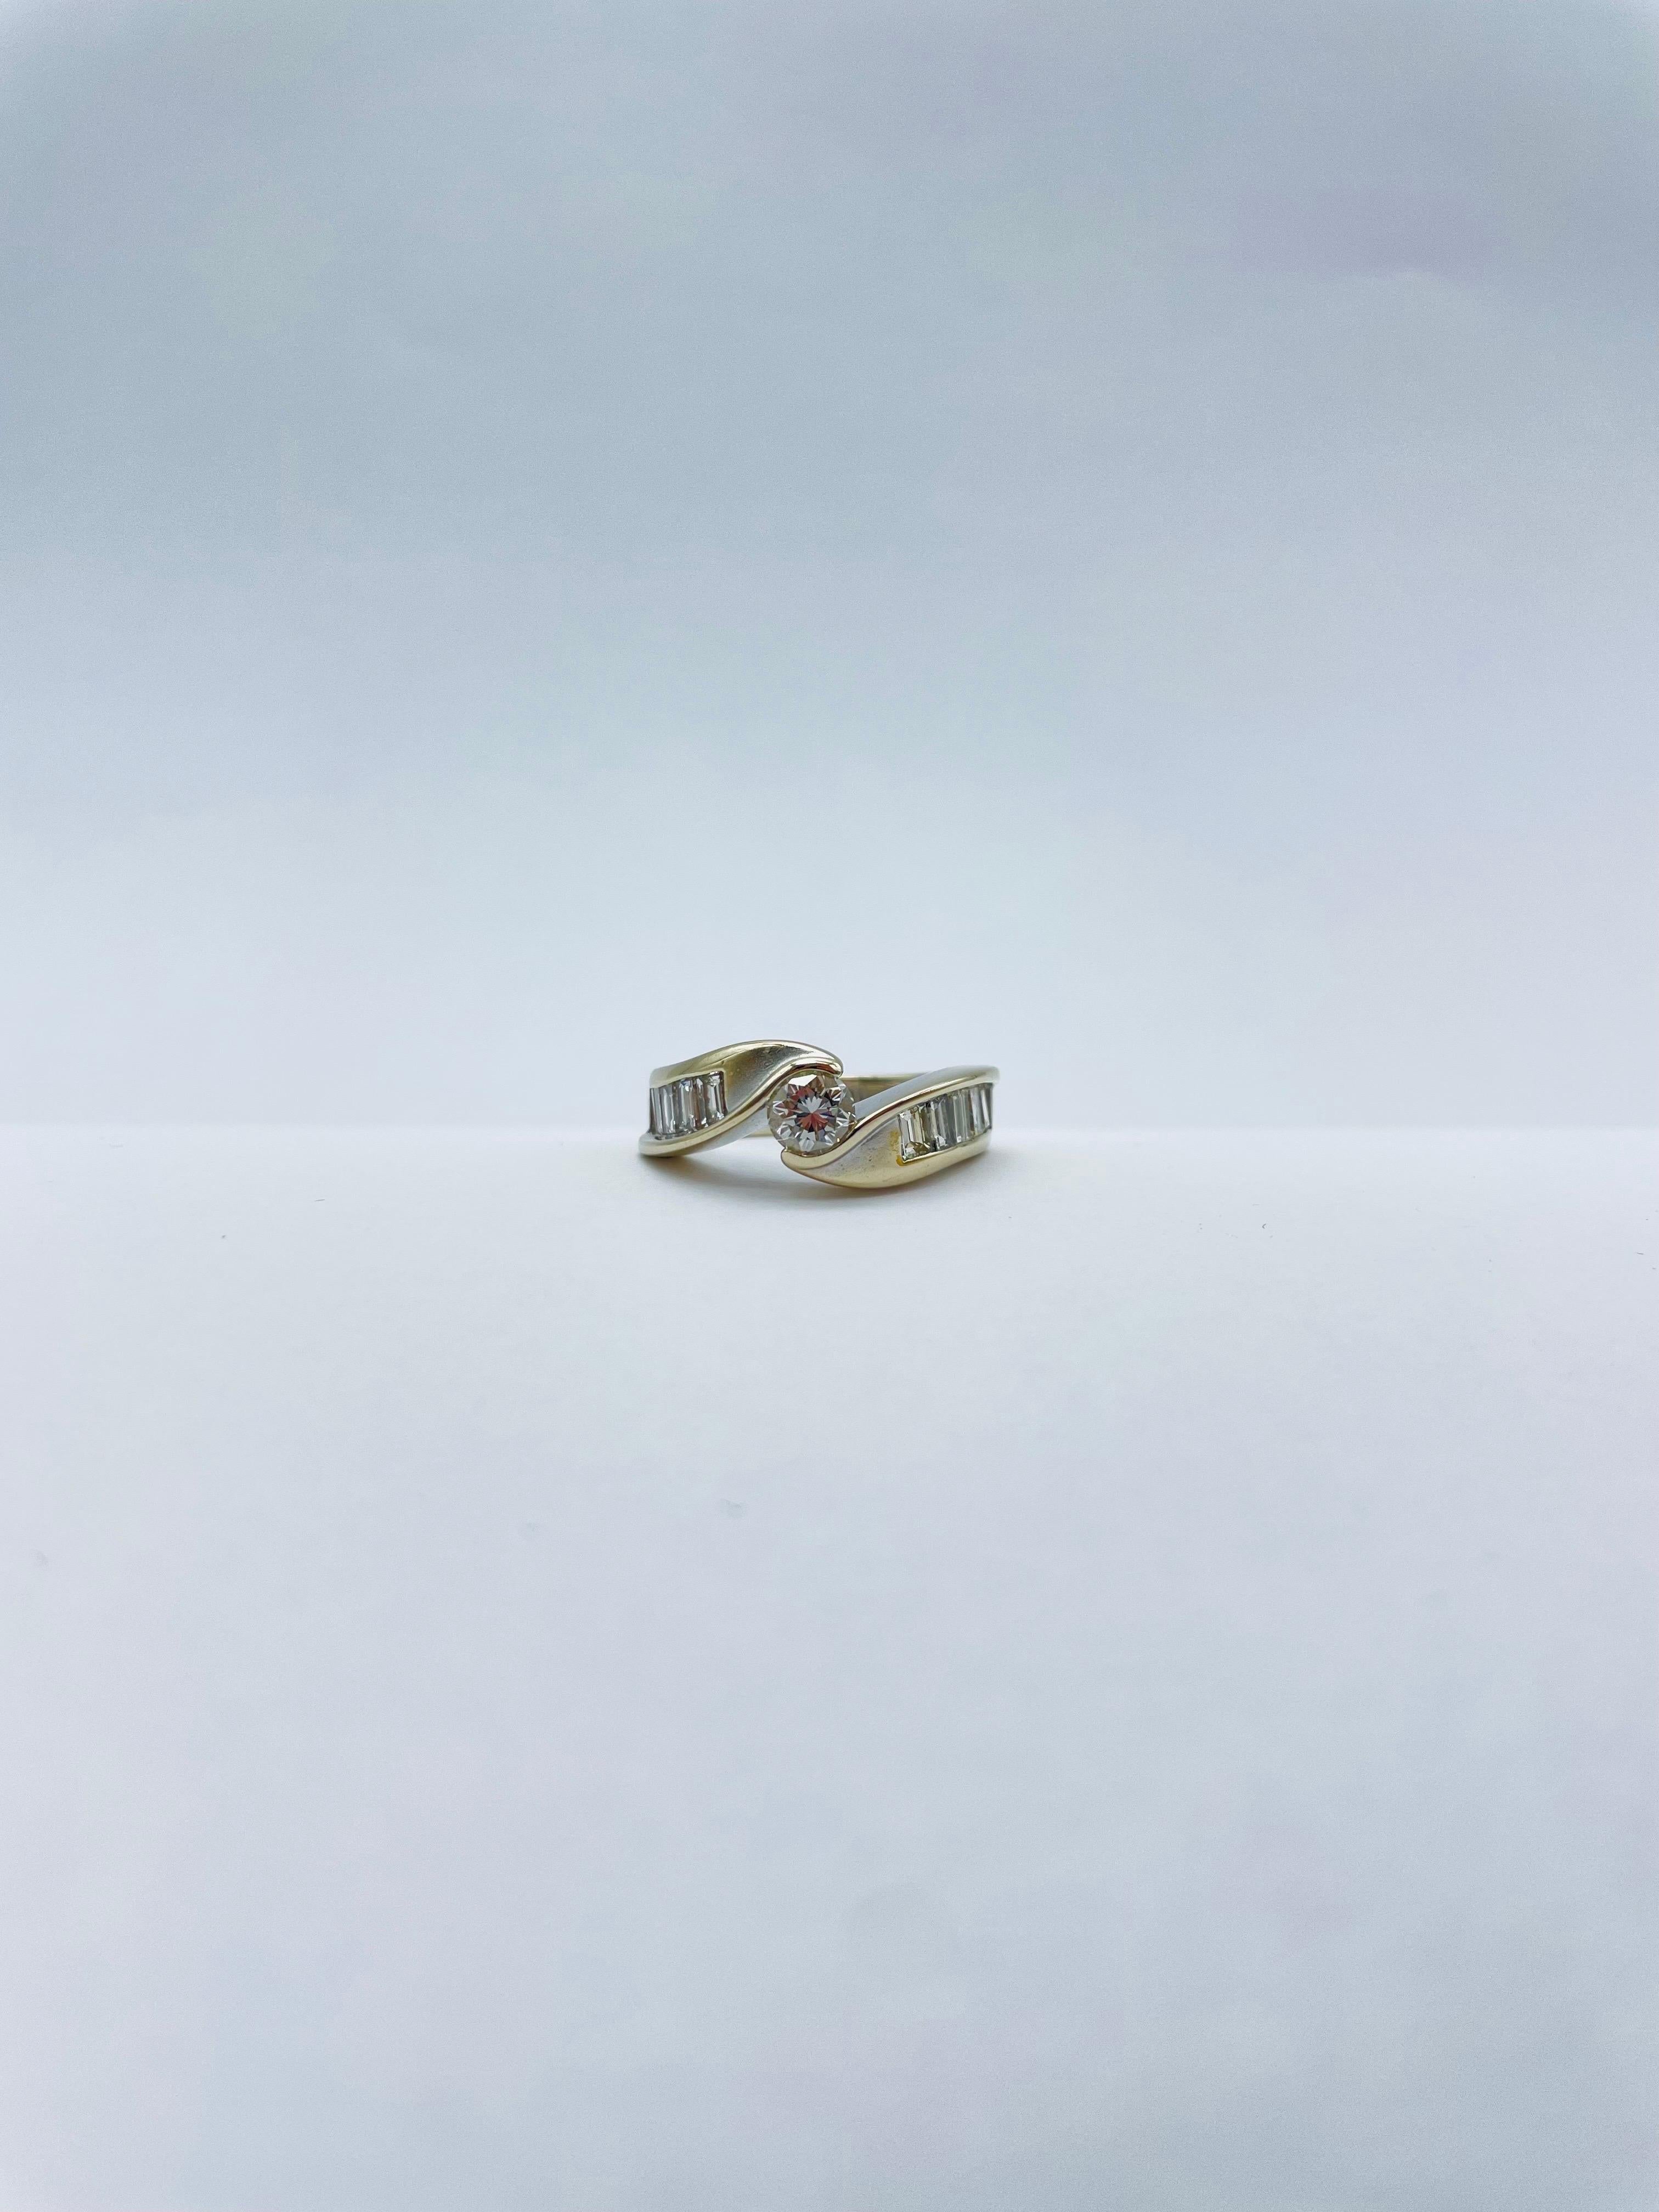 Unique 18k Gold Ring, 0.50 Carat Diamond and 8 Baguette, White/Yellow Gold For Sale 2